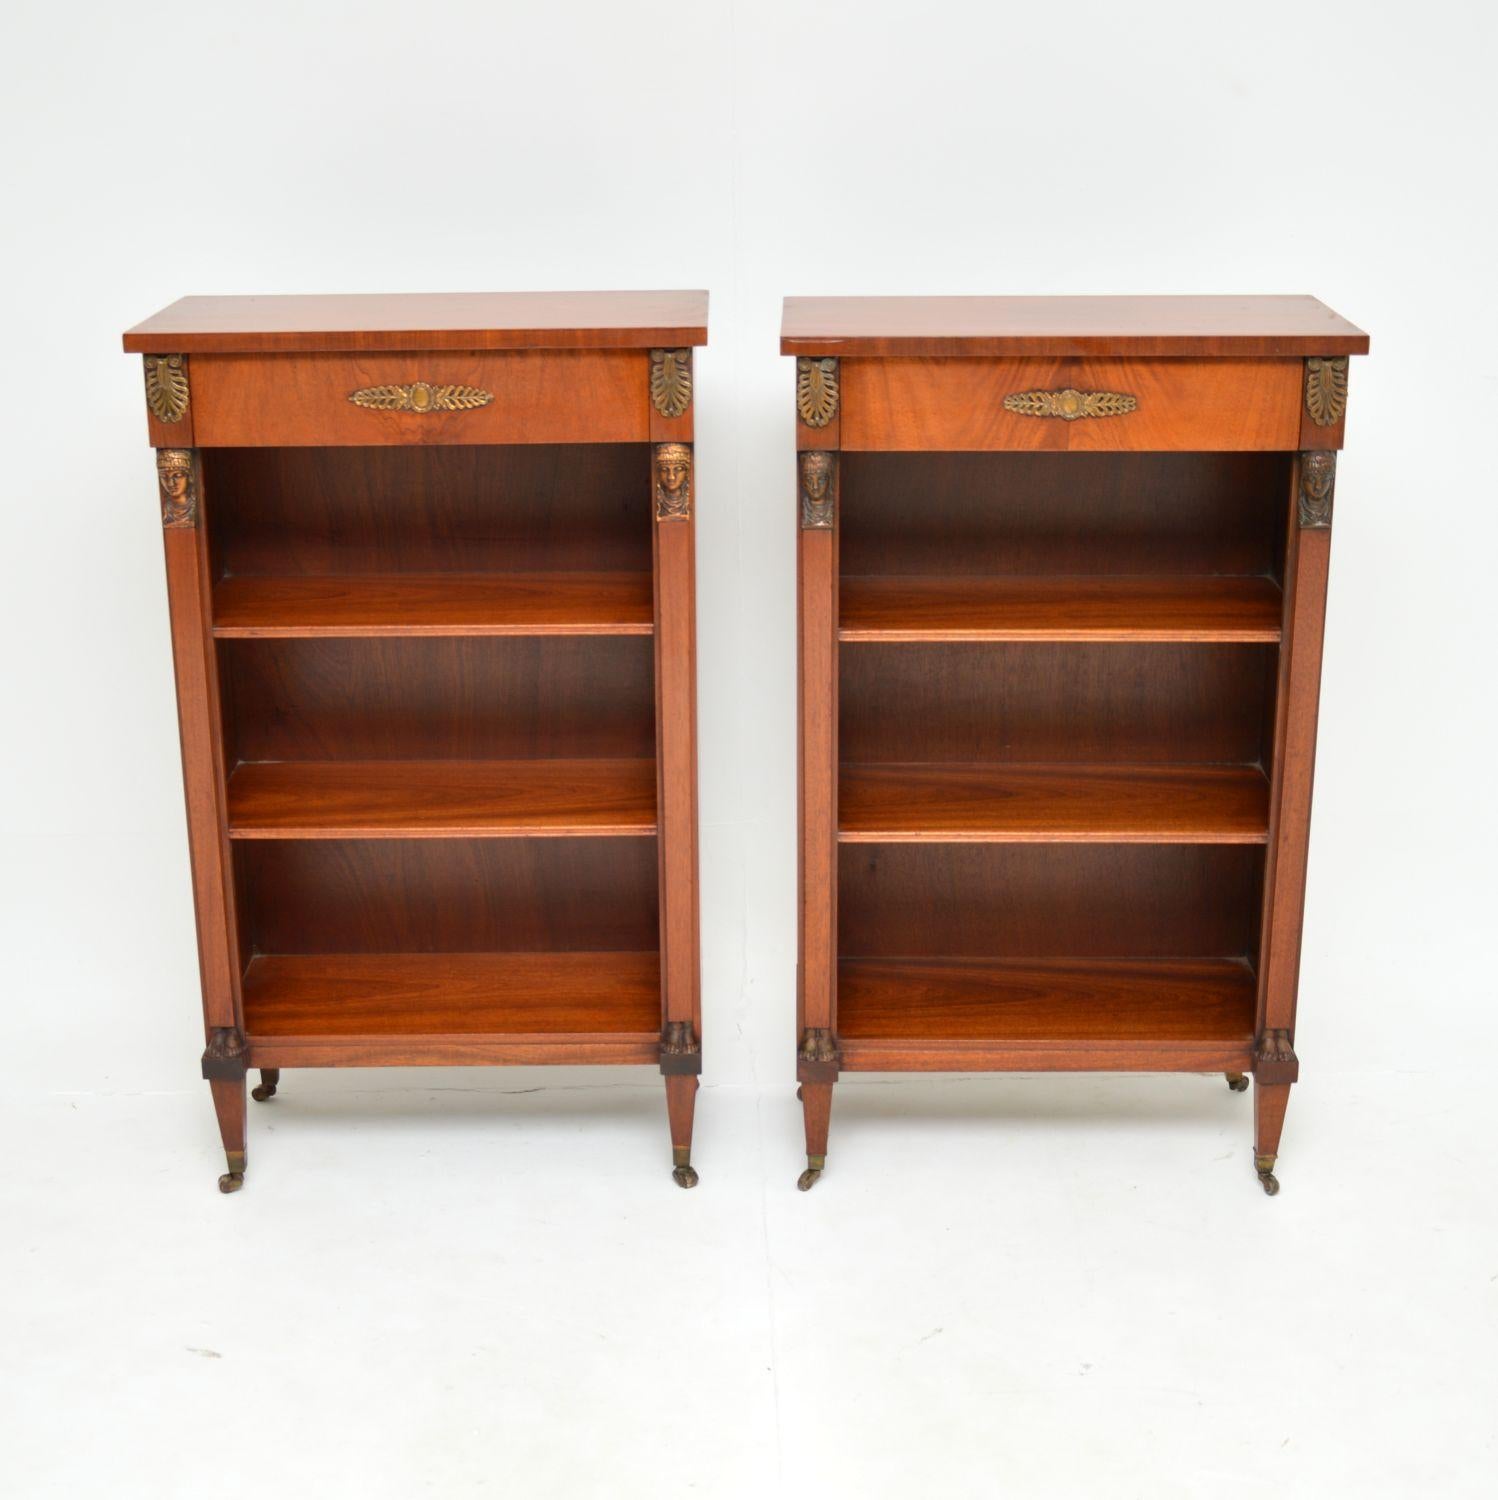 A beautiful and very well made pair of antique open bookcases. They are in the neo-classical style, and were made in England, around the 1950’s period.

The quality is superb and they are a very useful size. There are lovely ormolu mounts depicting